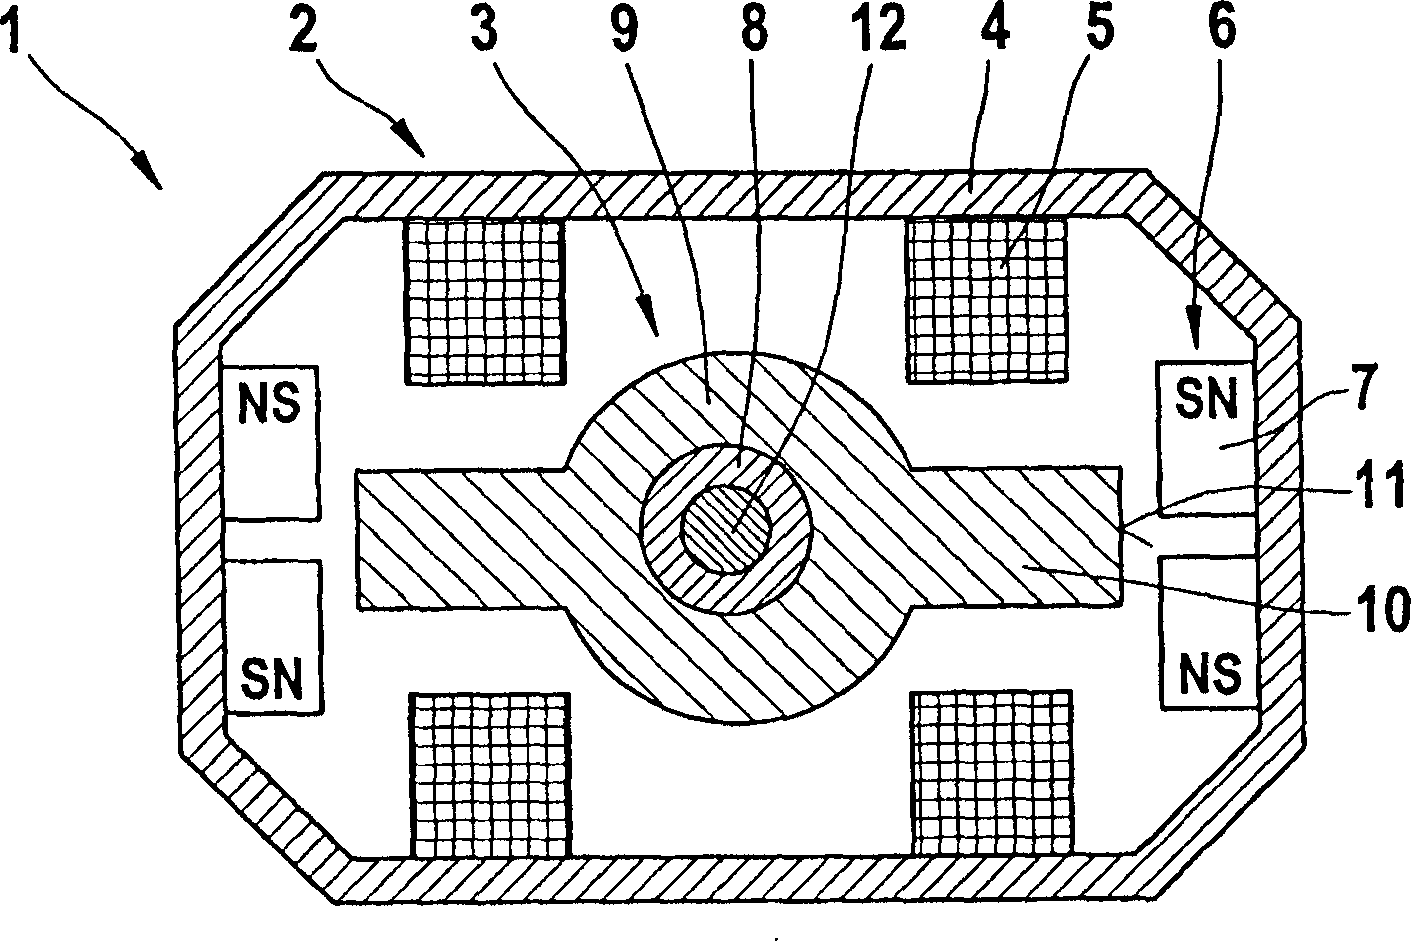 Drive unit for generating an oscillatory motion for electrical small-scale units